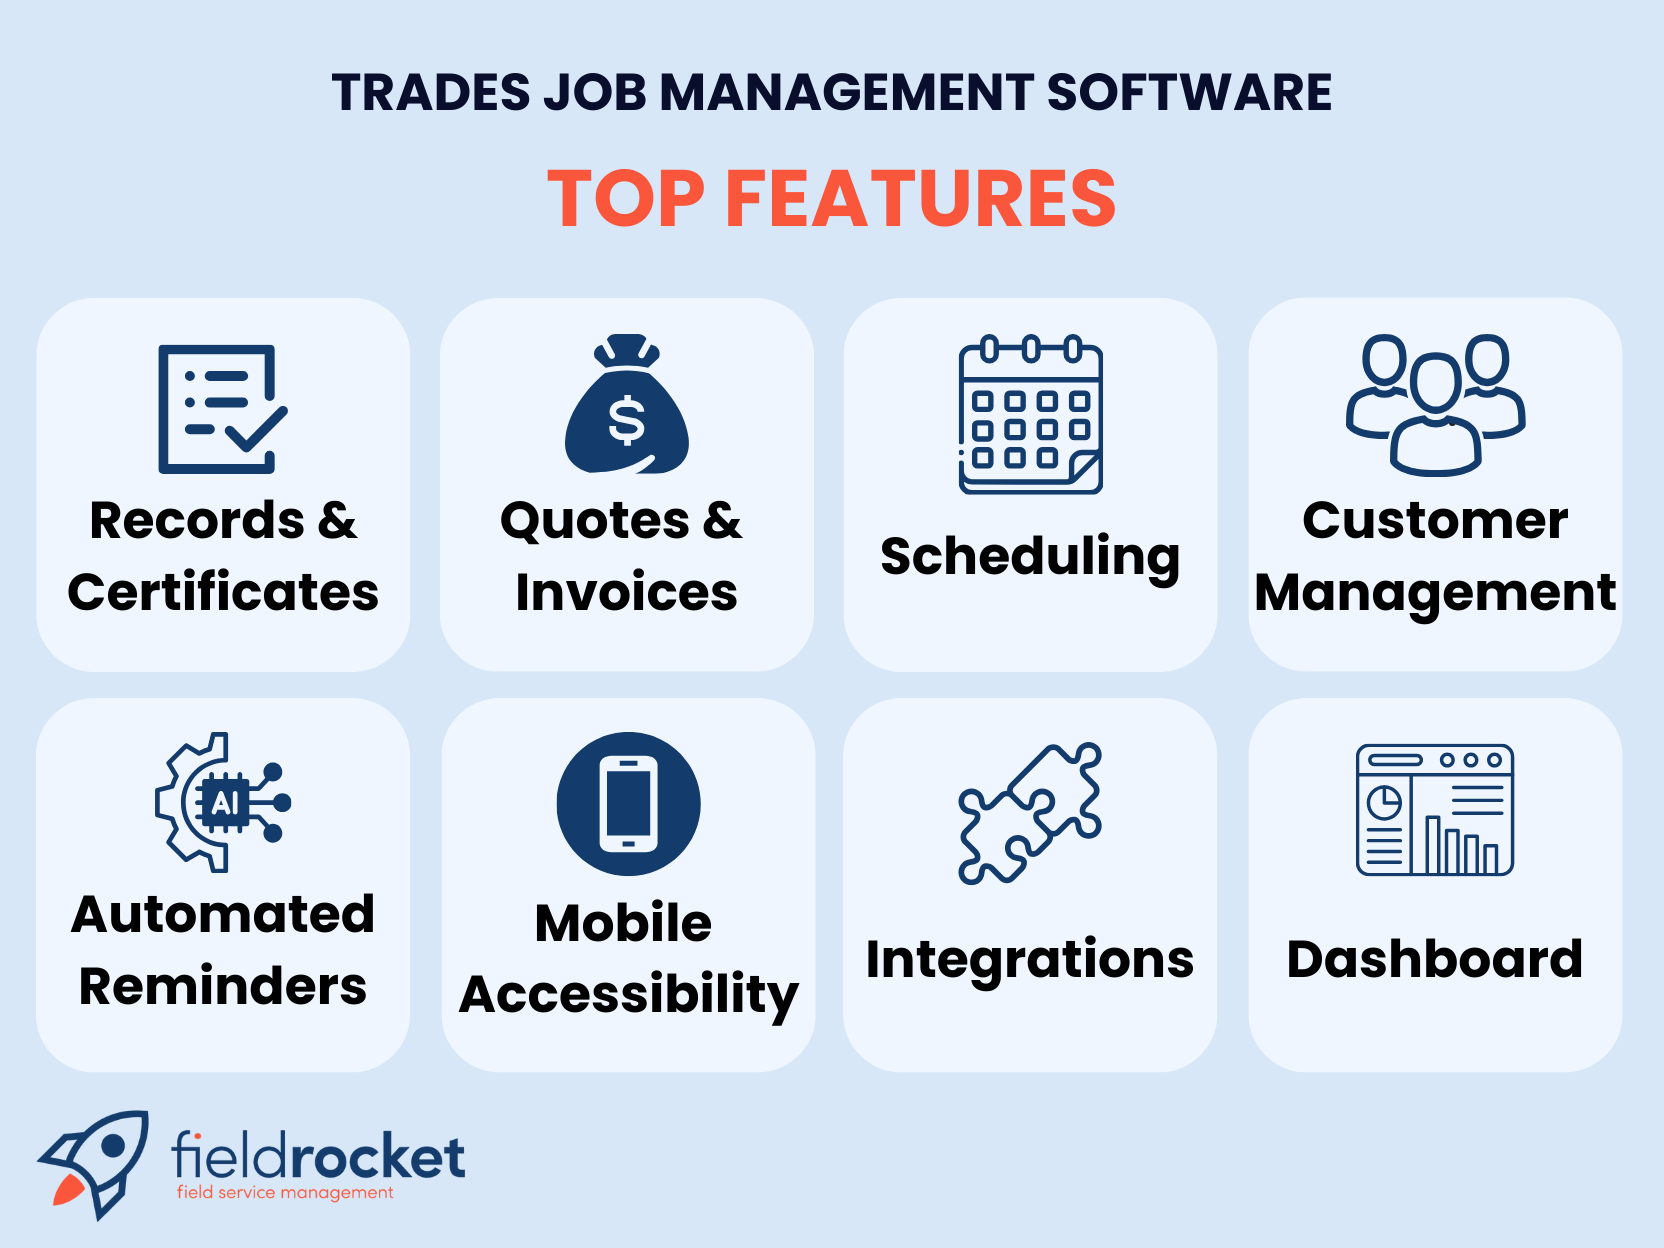 8 important features of job management software for tradespeople